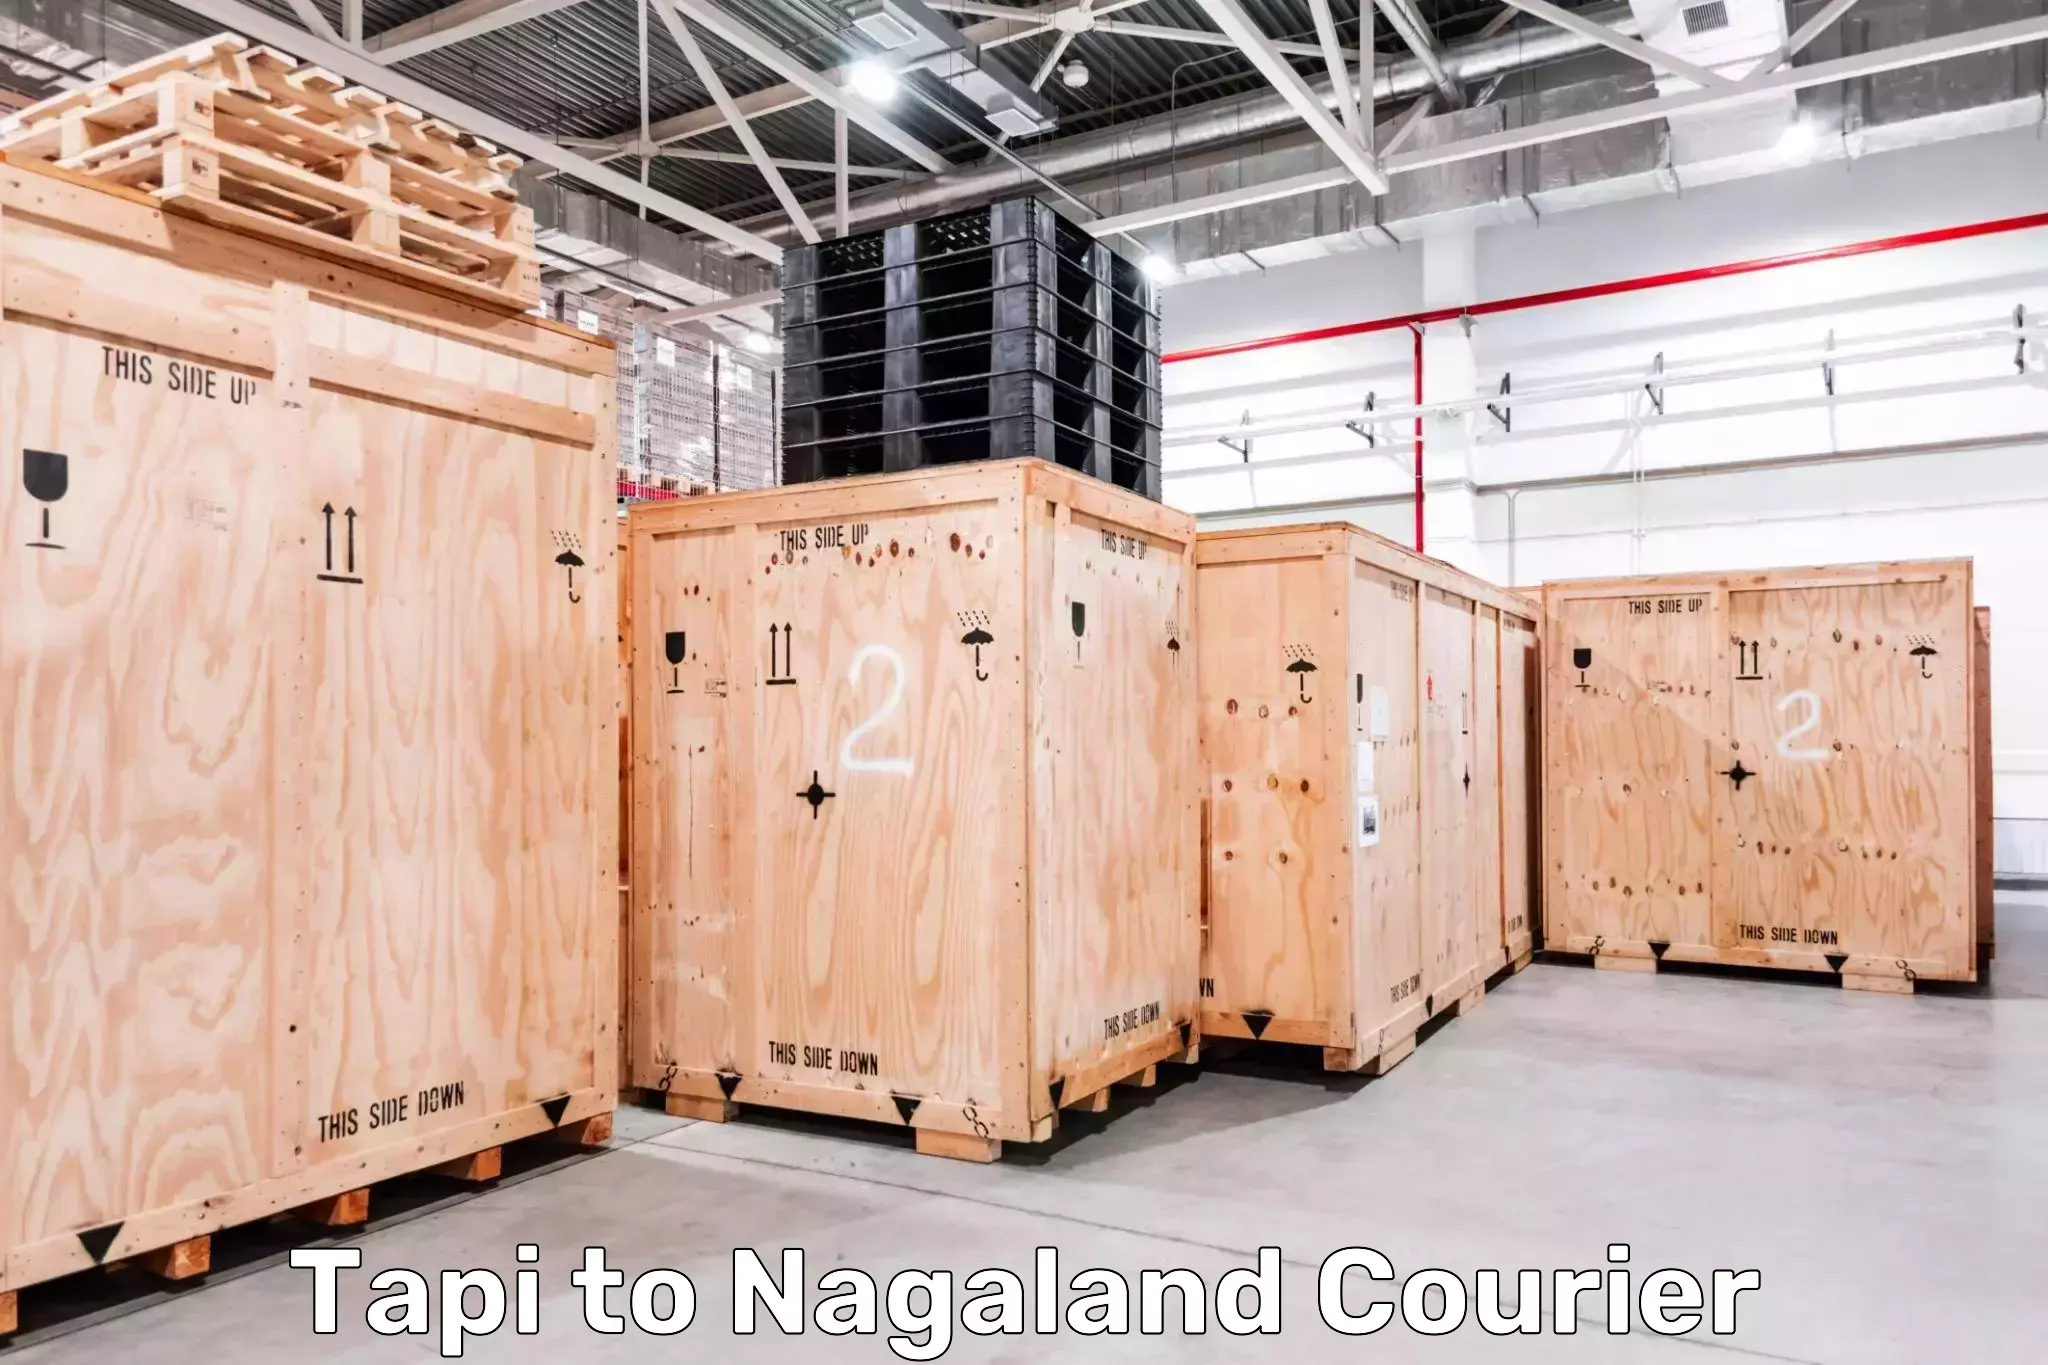 High-speed parcel service Tapi to Nagaland